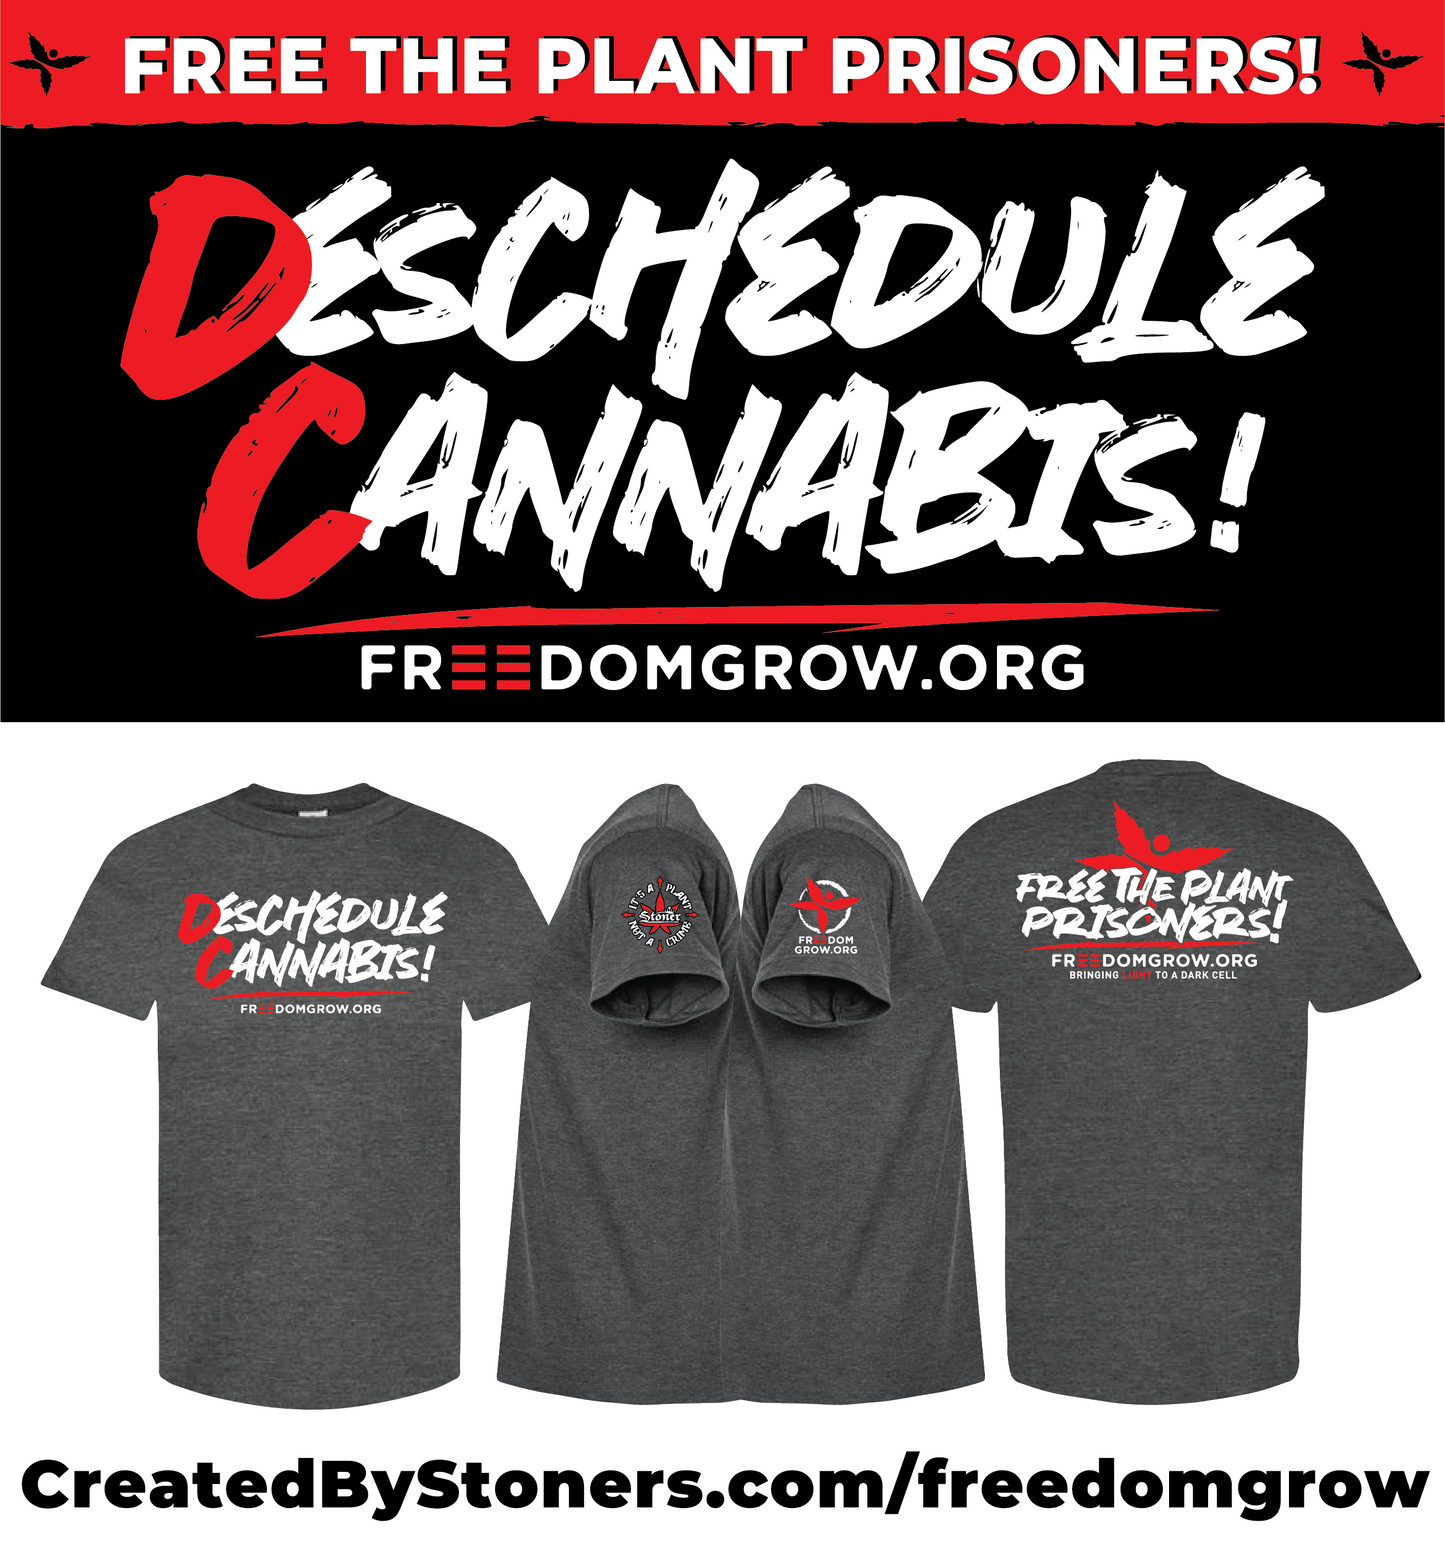 Created By Stoners x FreedomGrow.org Deschedule Collab (Unisex)